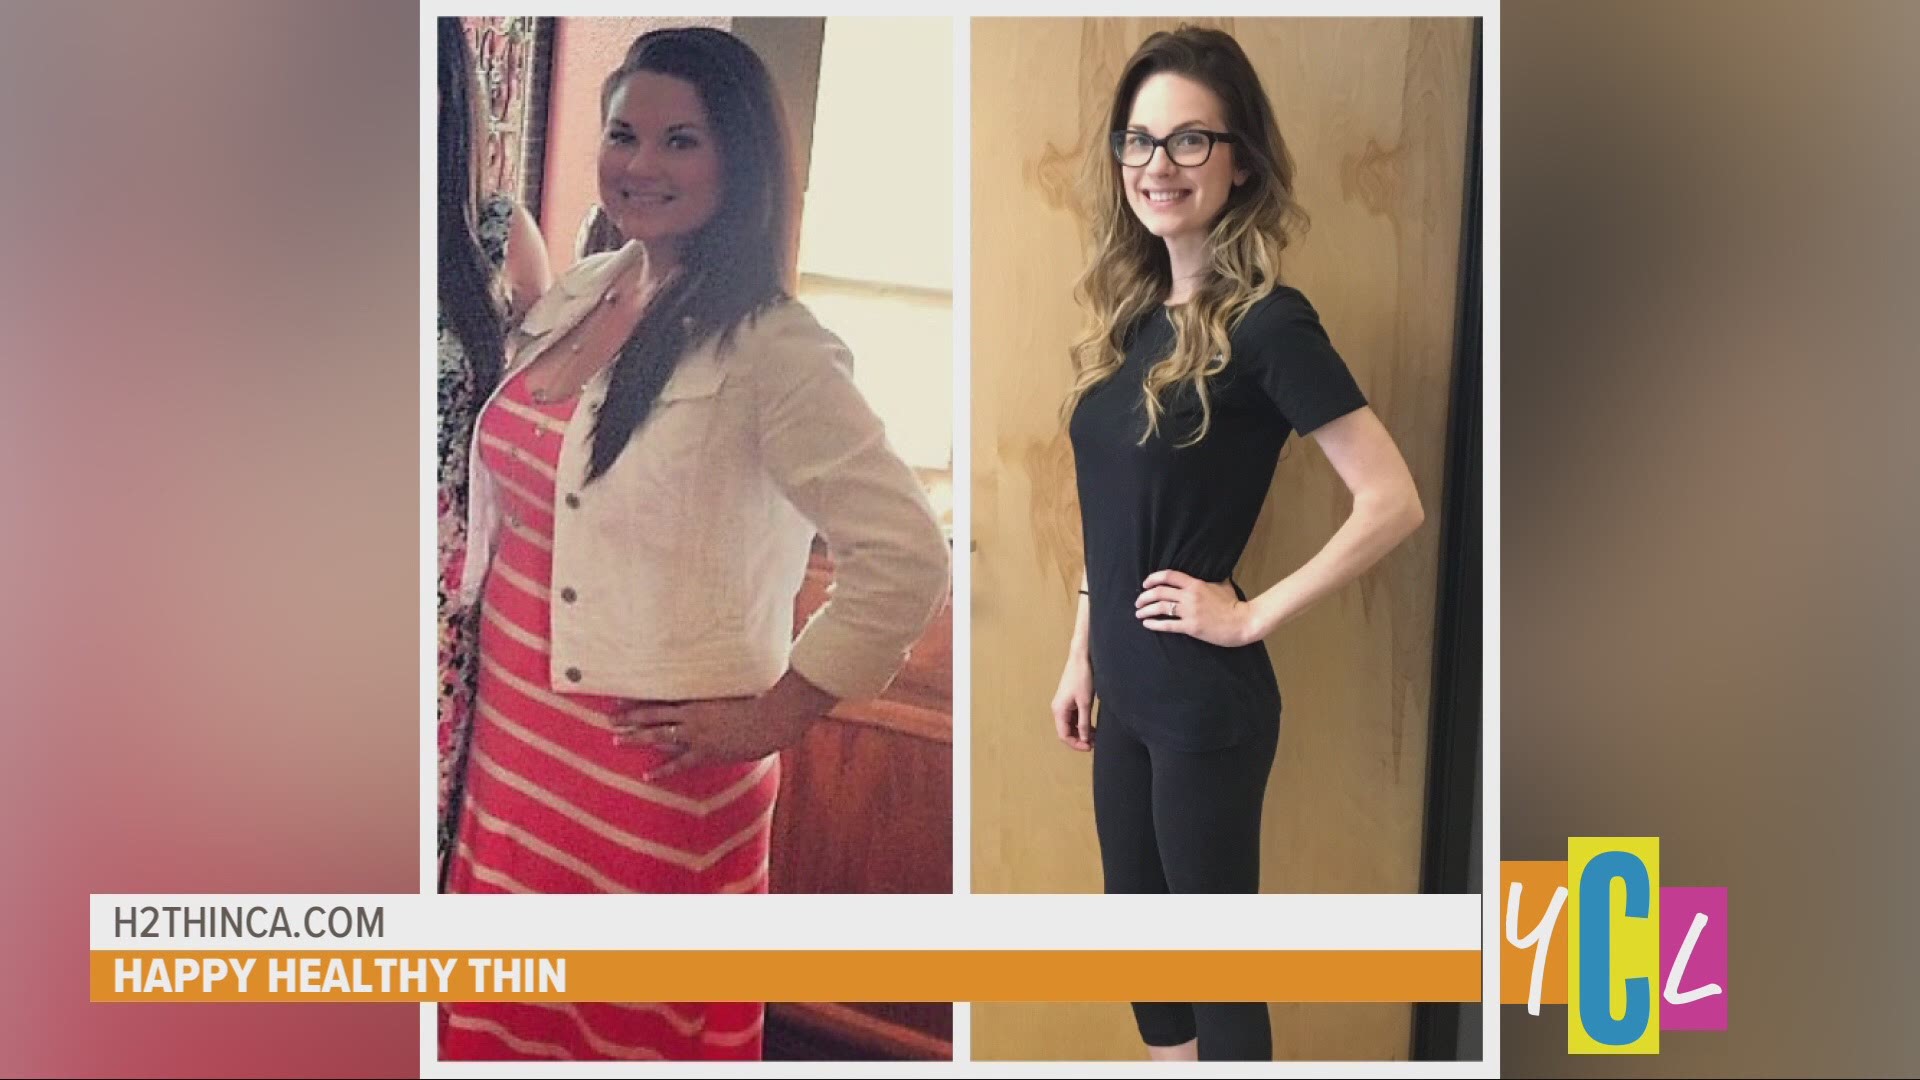 Get the body you’ve always wanted without dieting or exercising. The following is a paid segment sponsored by Happy Healthy Thin.